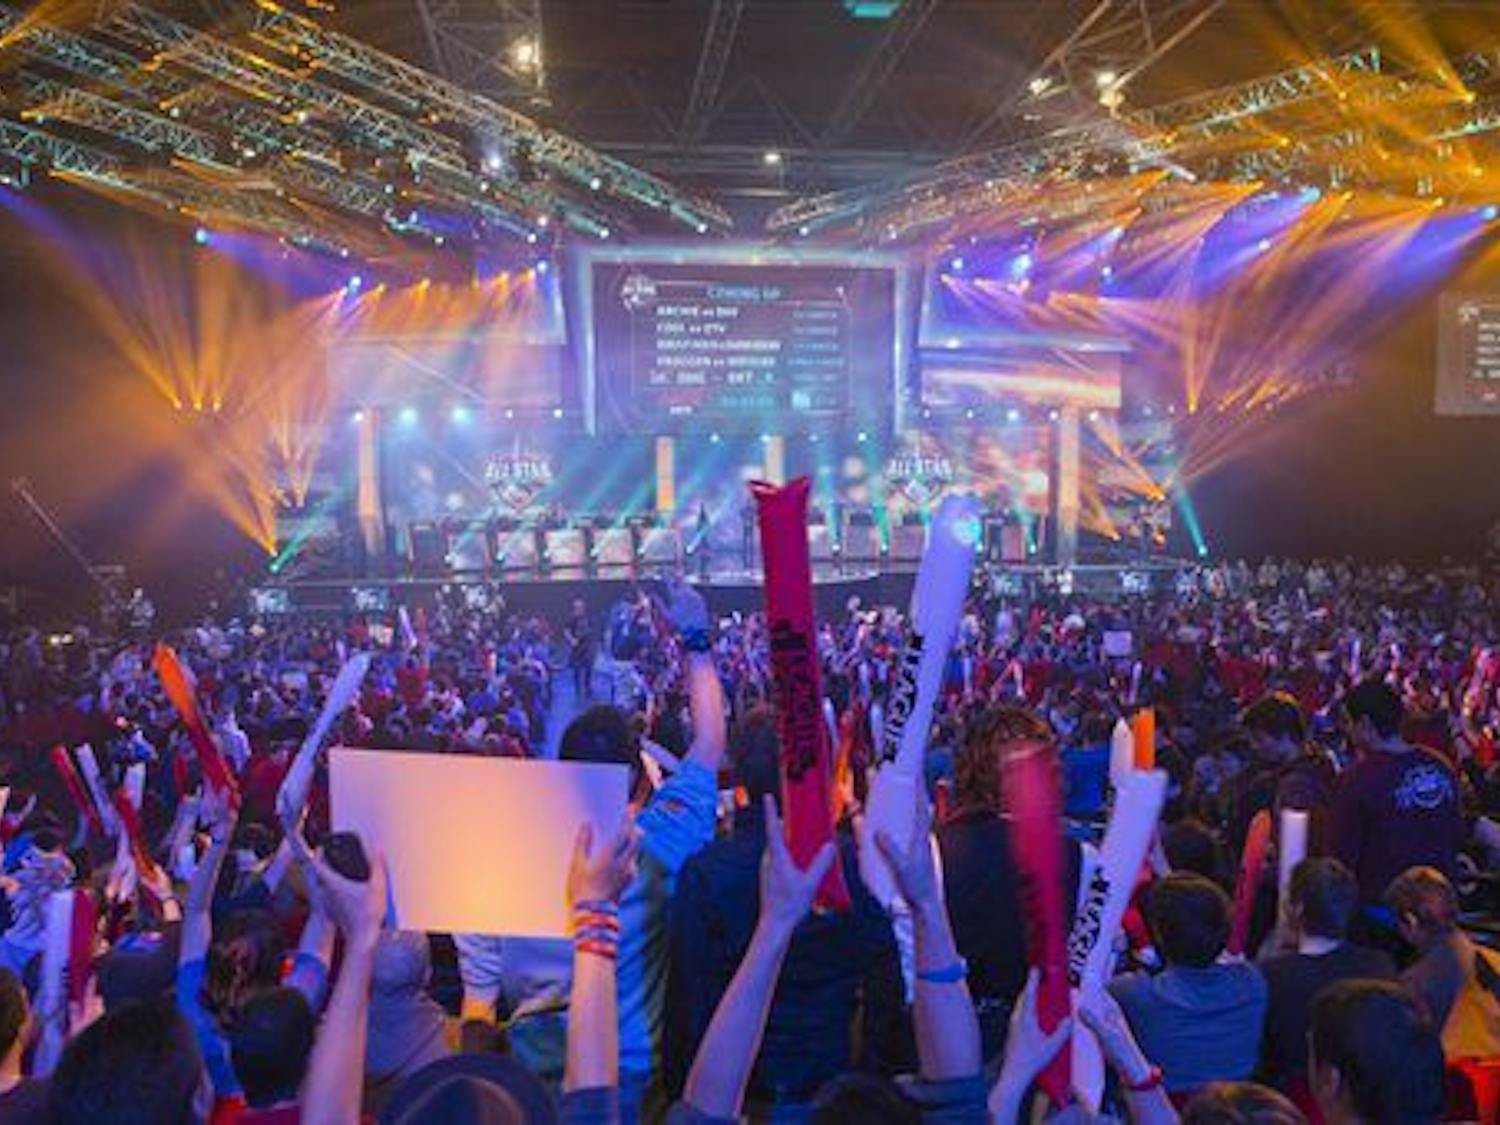 Esports are rising in popularity and legitimacy. The top gamer in the world, Germany's Kuro Takhasomi, has won nearly $3.5 million in his career playing "Dota 2."